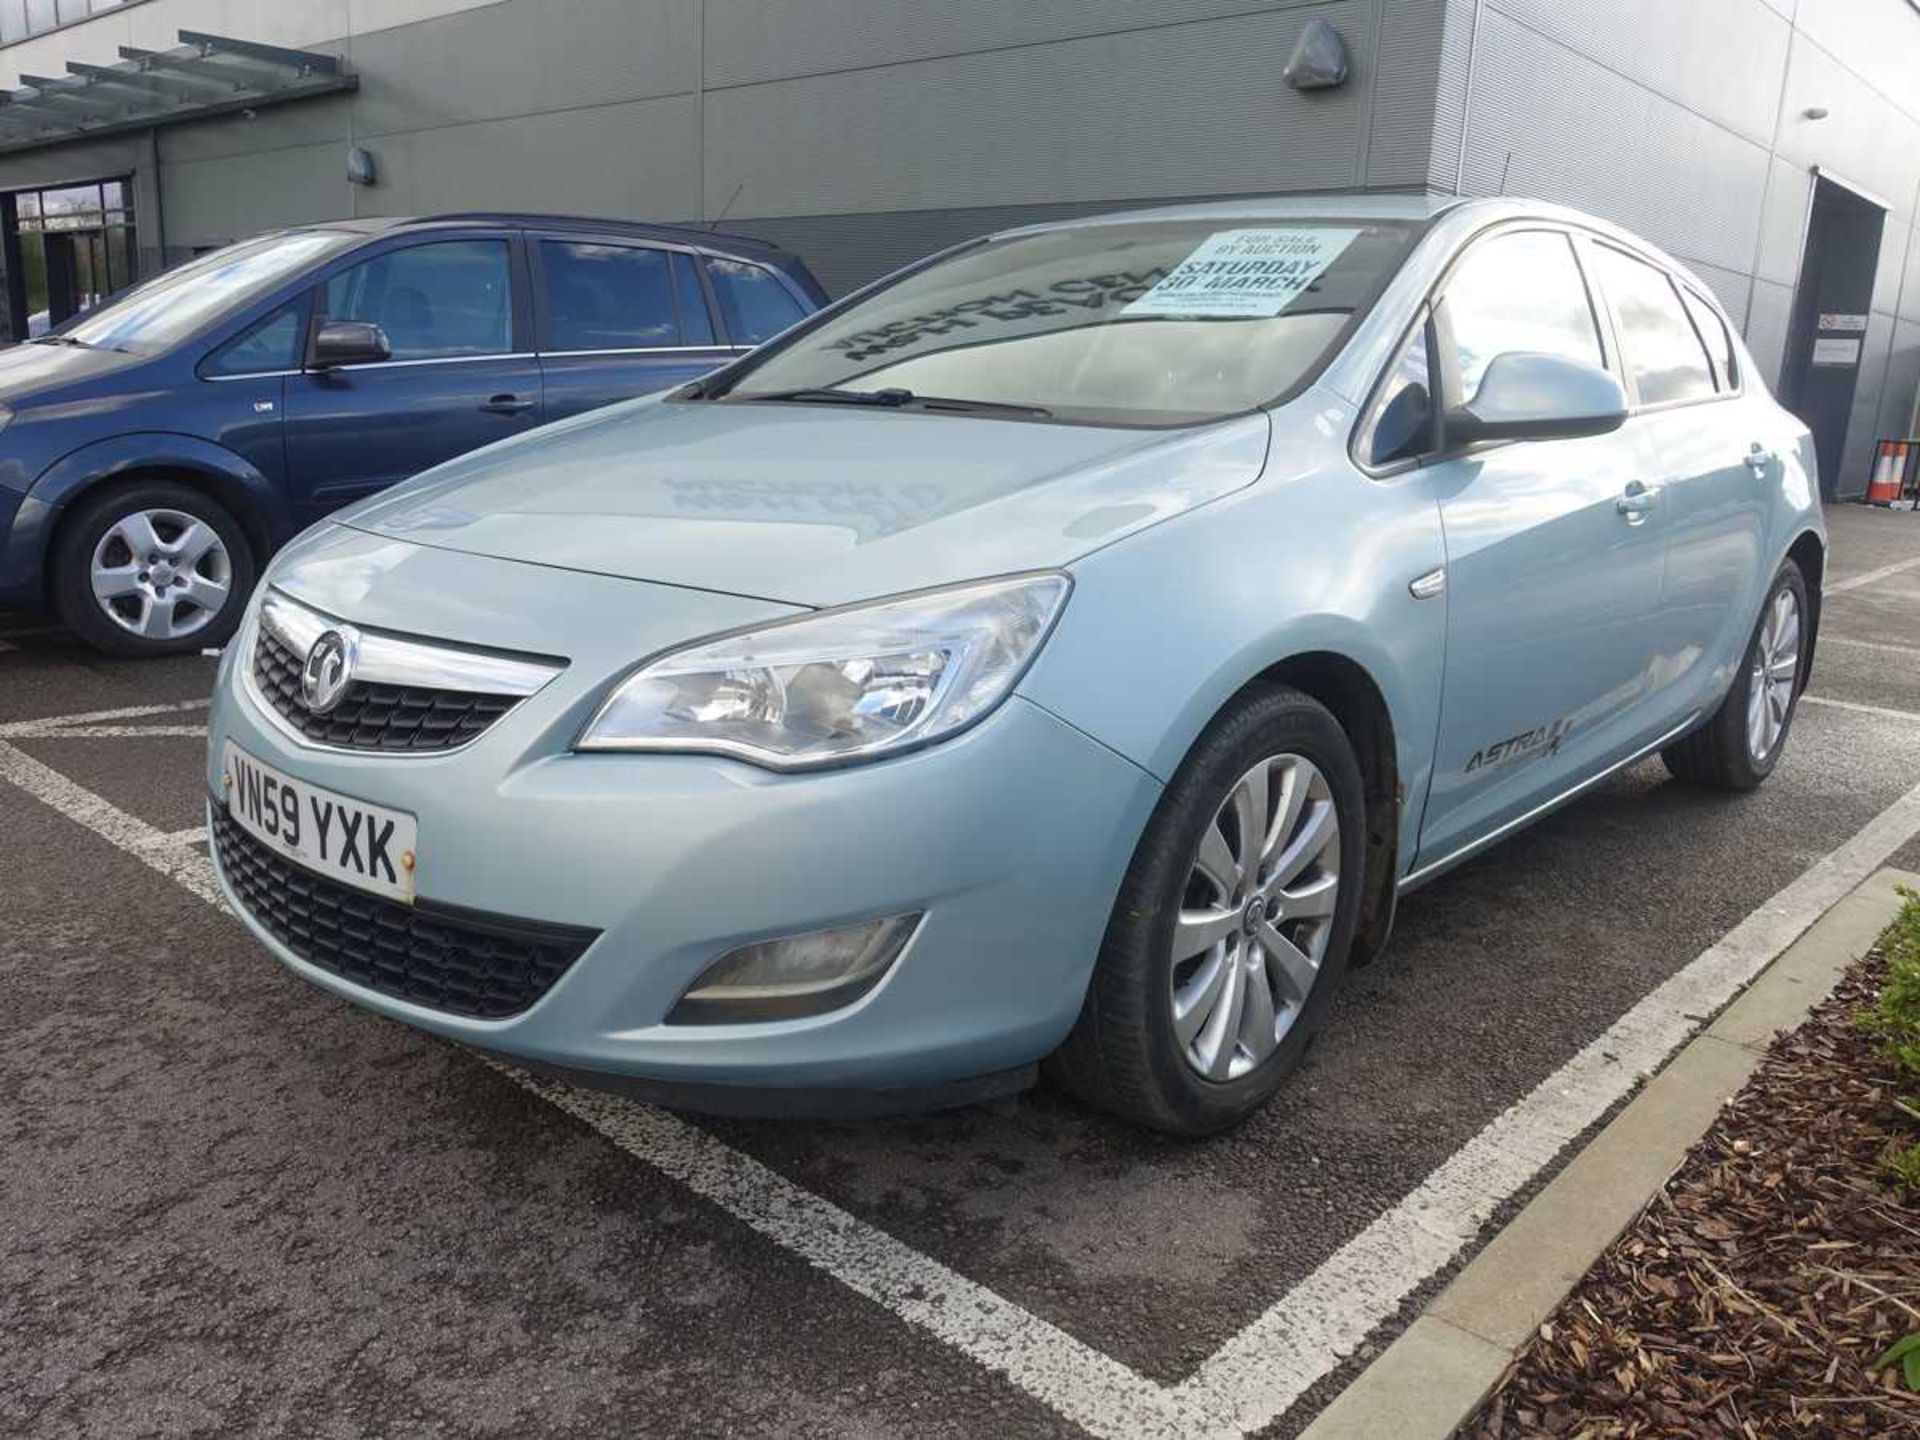 (VN59 YXK) Vauxhall Astra Exclusiv CDTI 108 in blue, first registered 17/12/2009, 6 speed, 5 door - Image 3 of 11